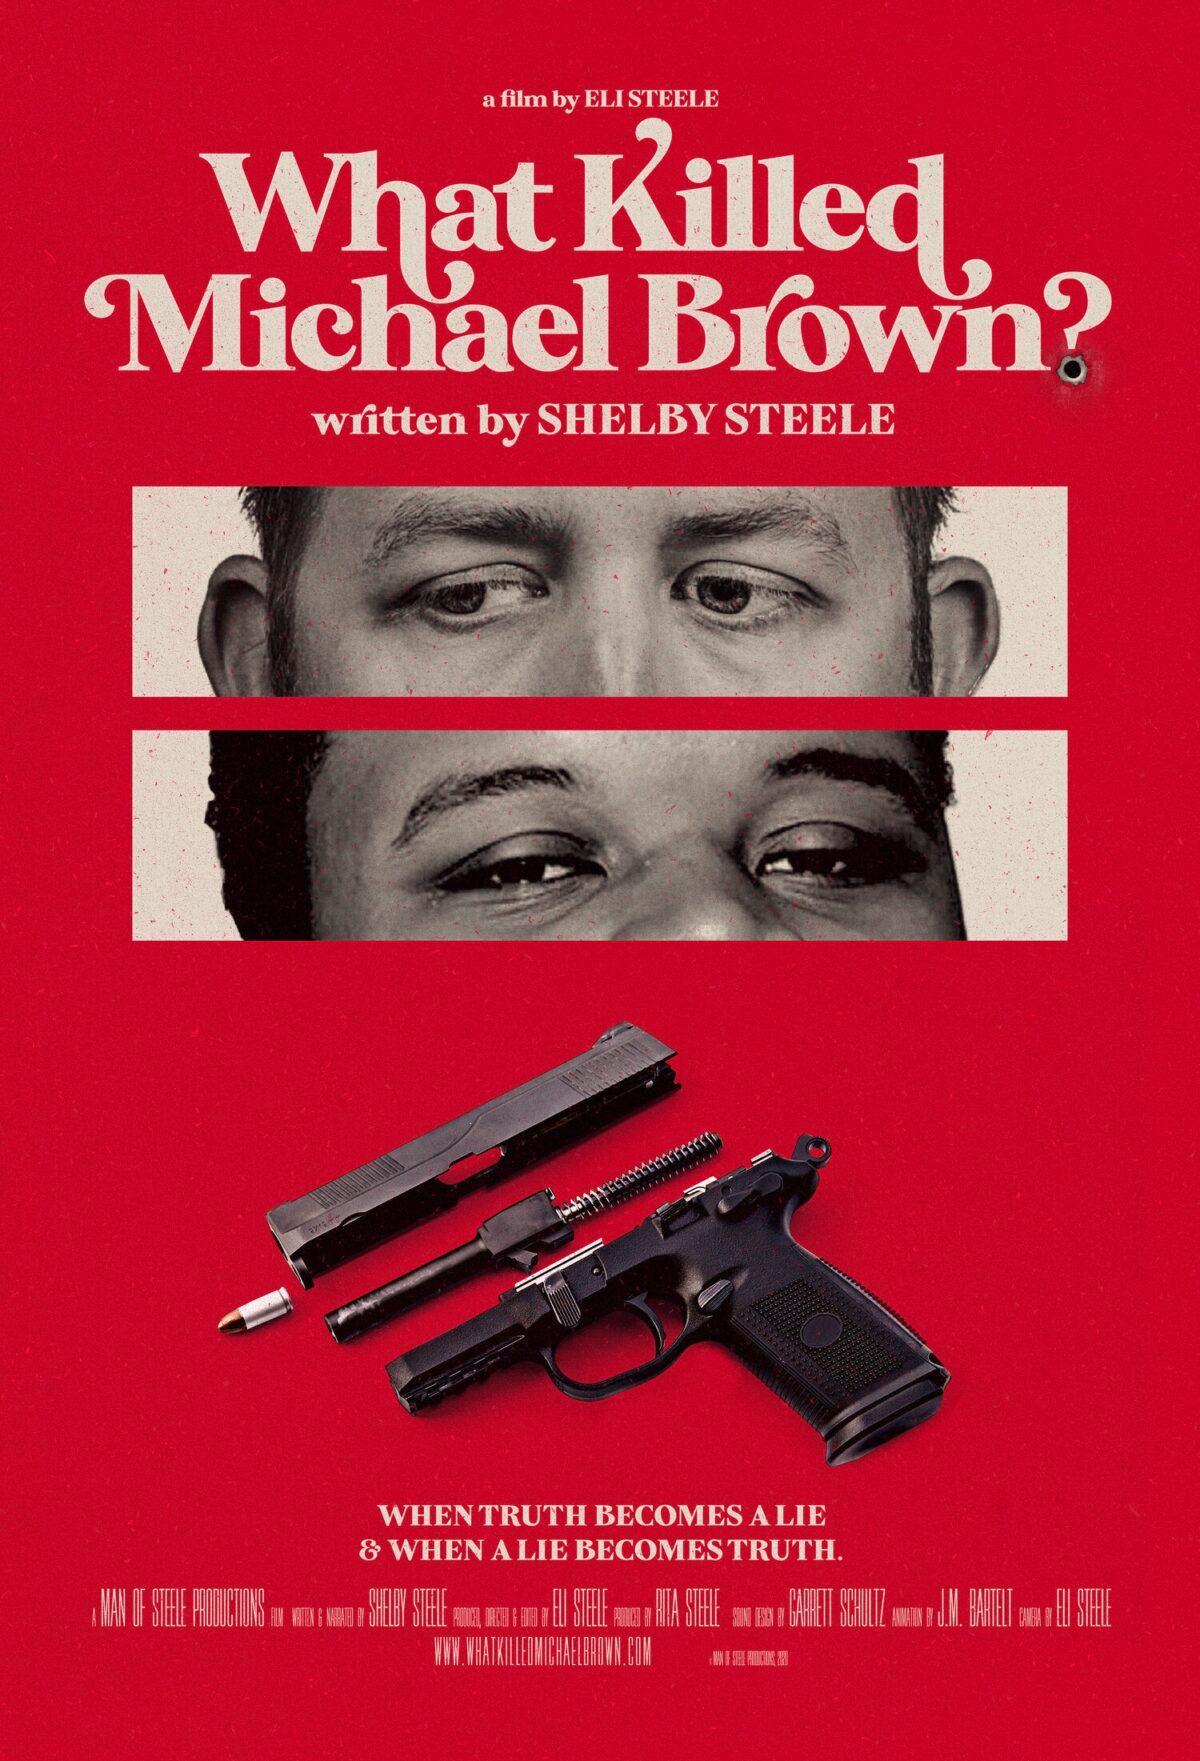 Poster for "What Killed Michael Brown?" (Courtesy "What Killed Michael Brown?")